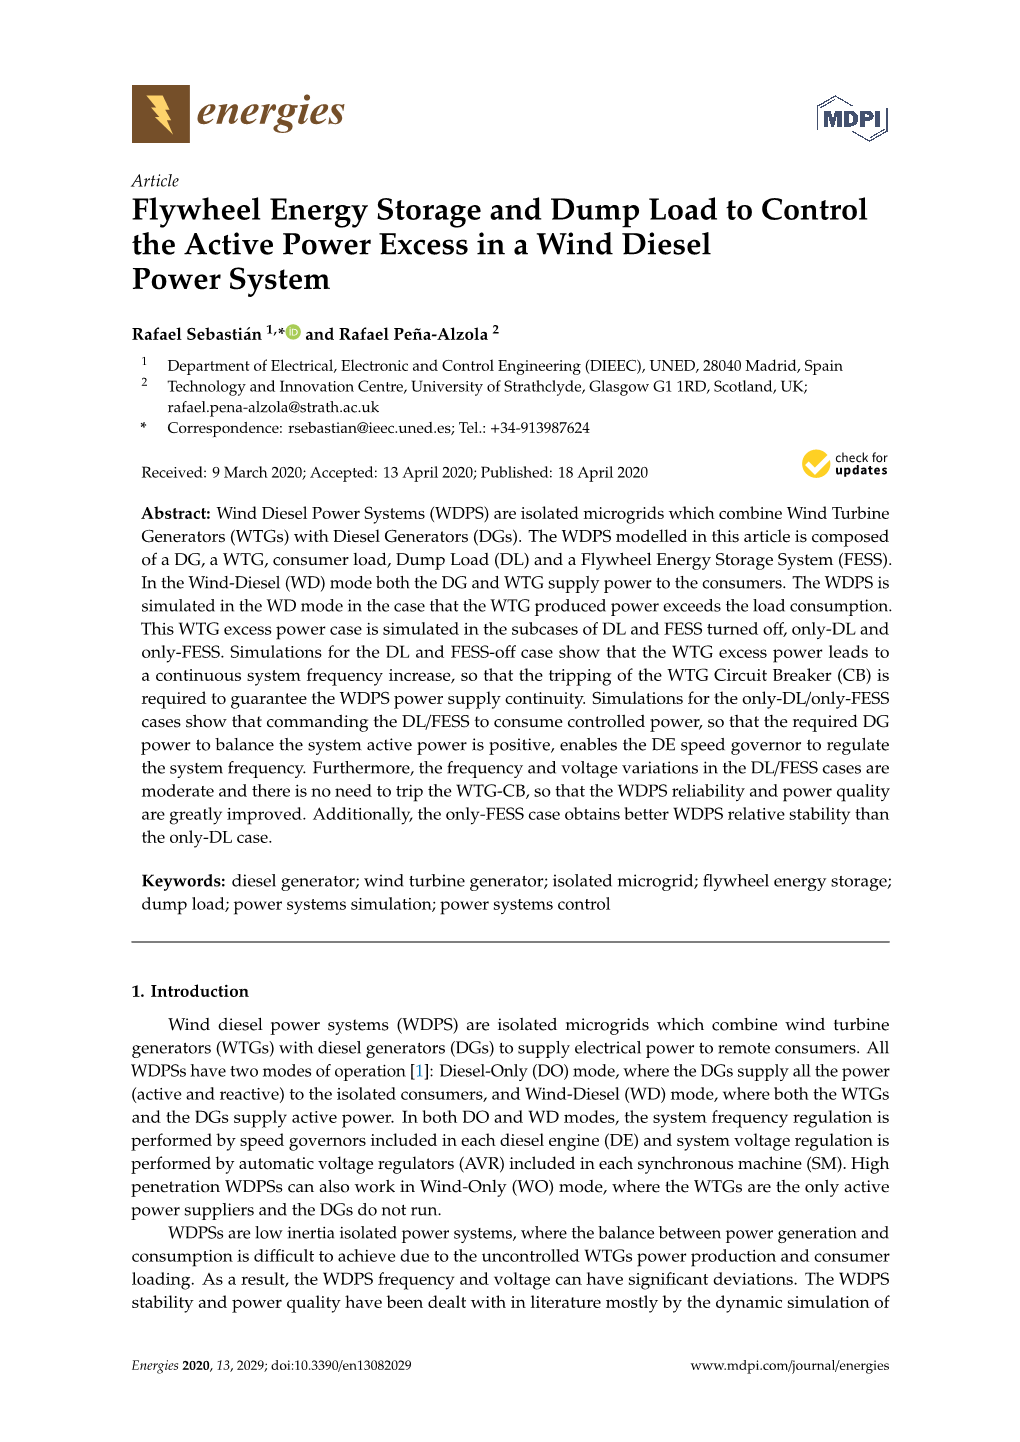 Flywheel Energy Storage and Dump Load to Control the Active Power Excess in a Wind Diesel Power System